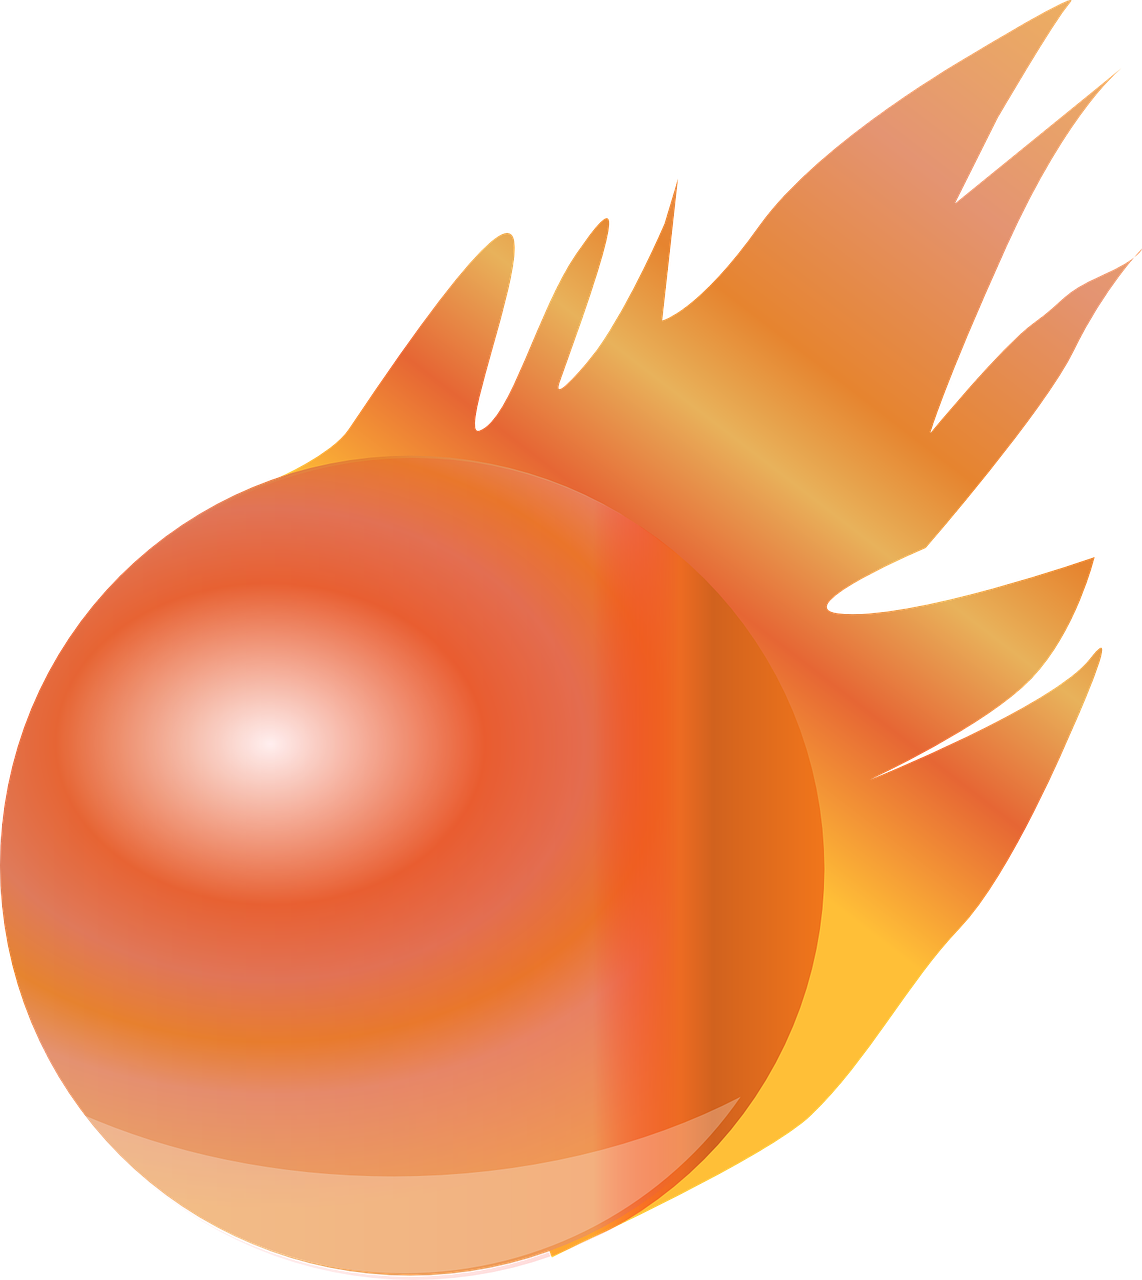 Fireball,ball,fire,bomb,flames free image from